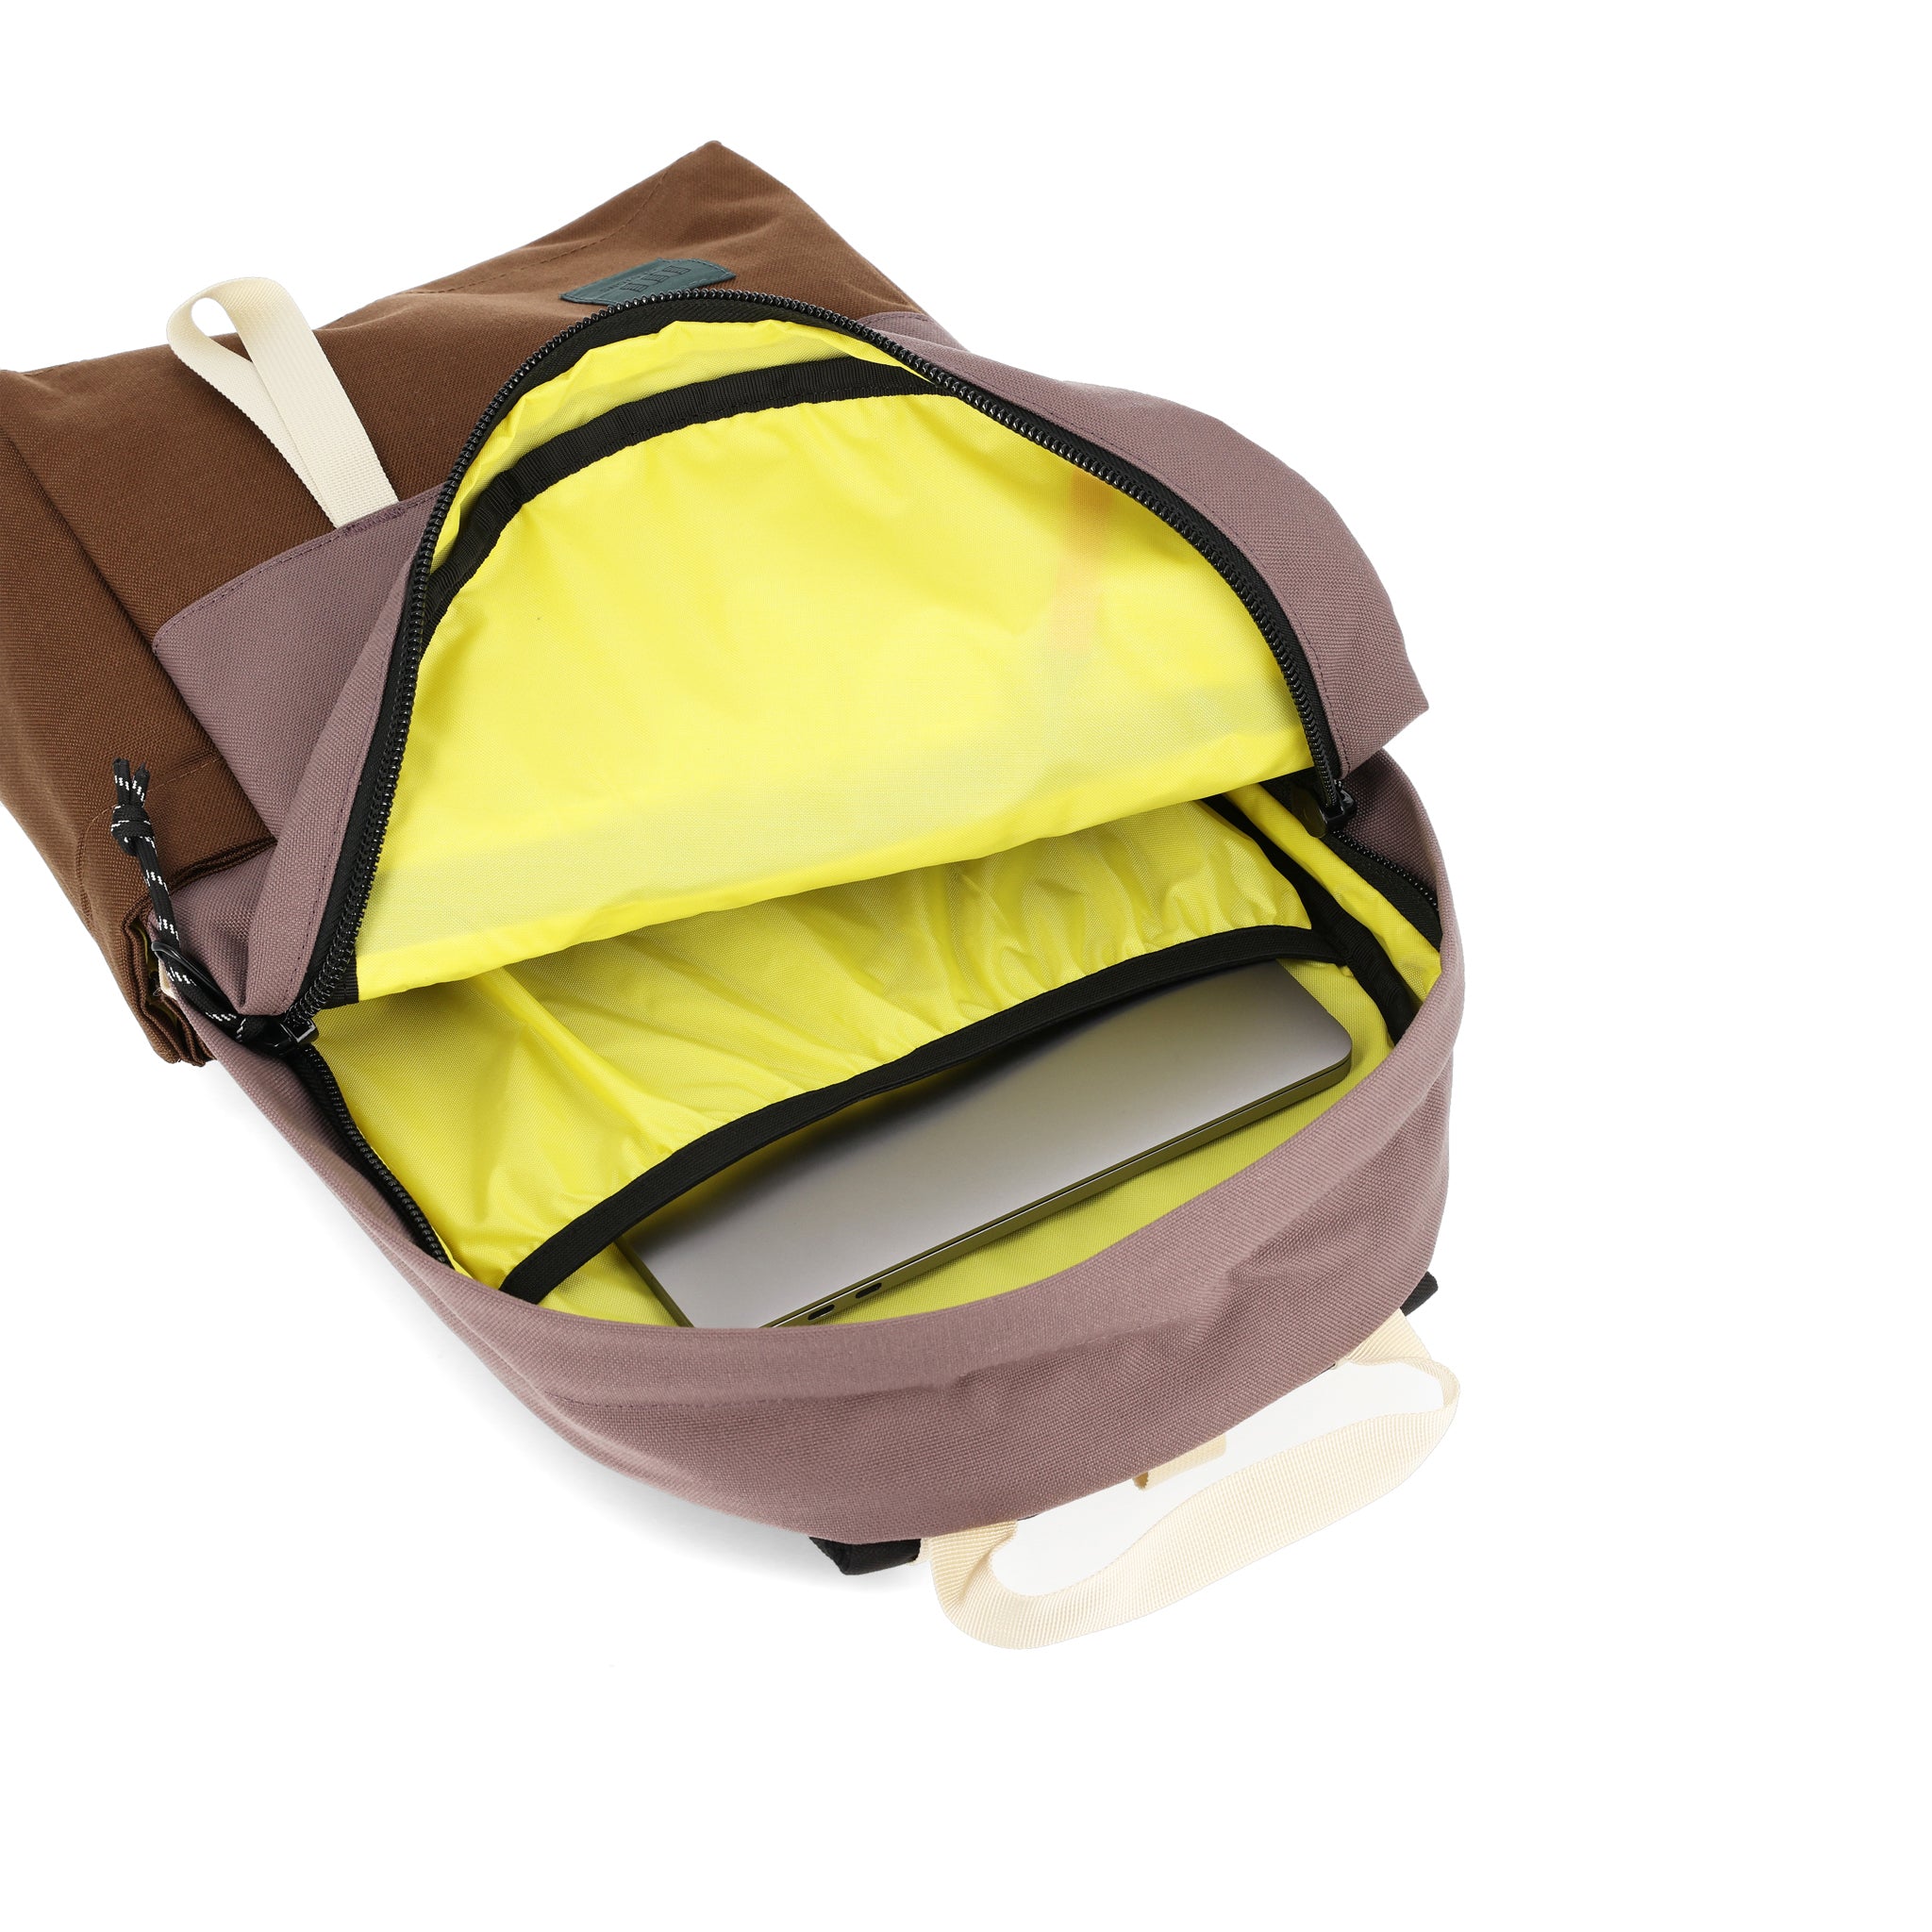 Daypack | Recycled Laptop Backpack | Topo Designs